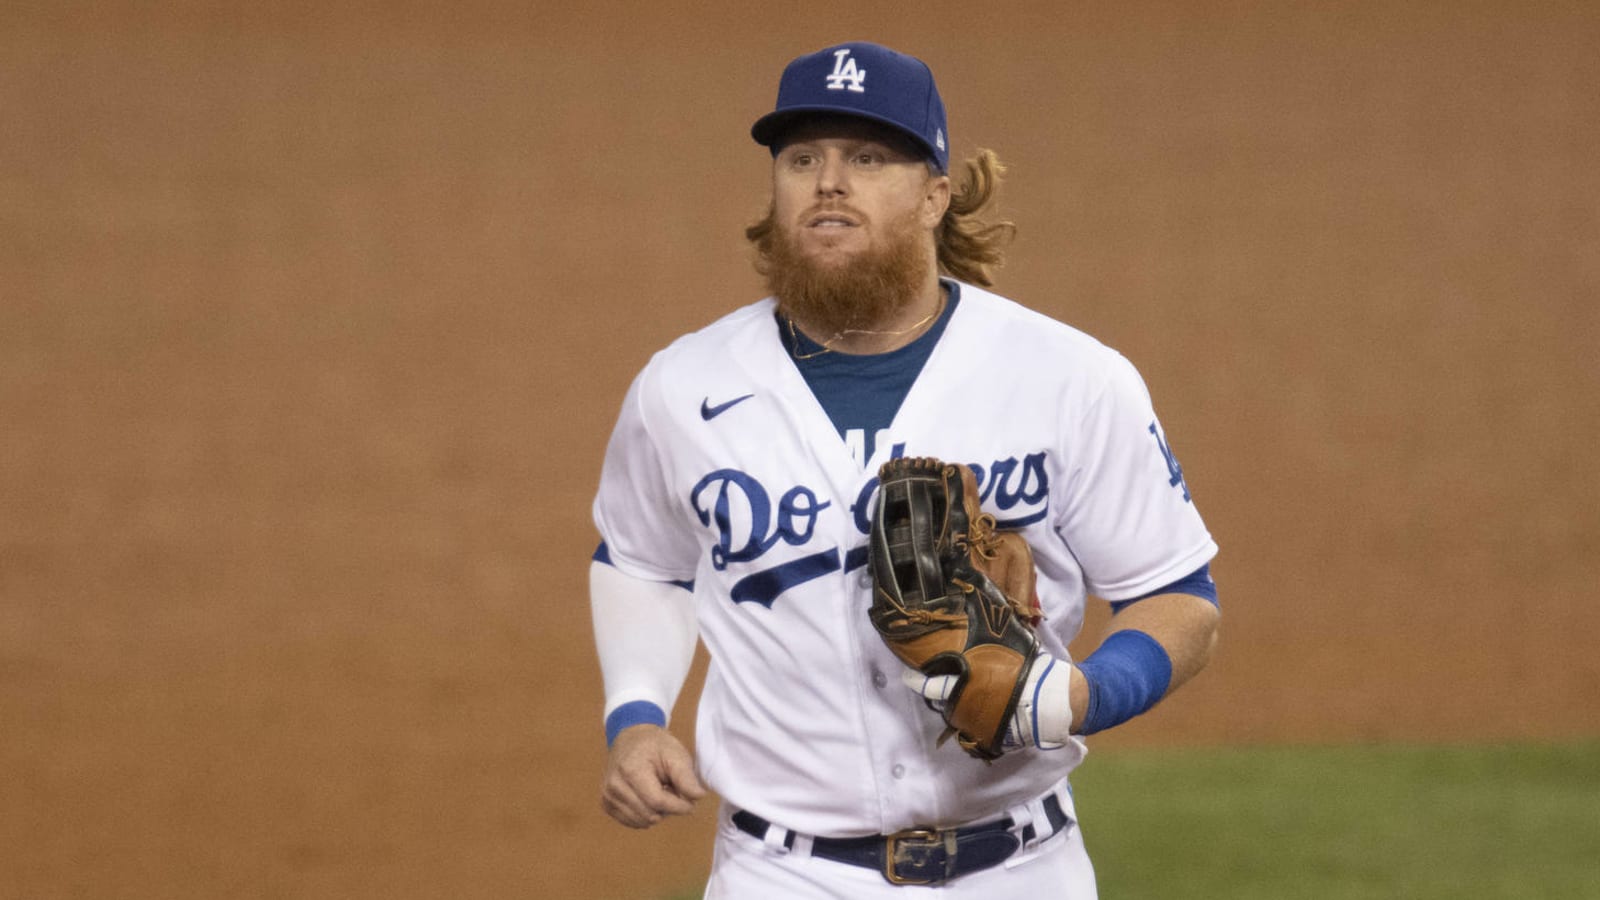 Dodgers' Justin Turner Makes a Young Fan's Day in This Adorable